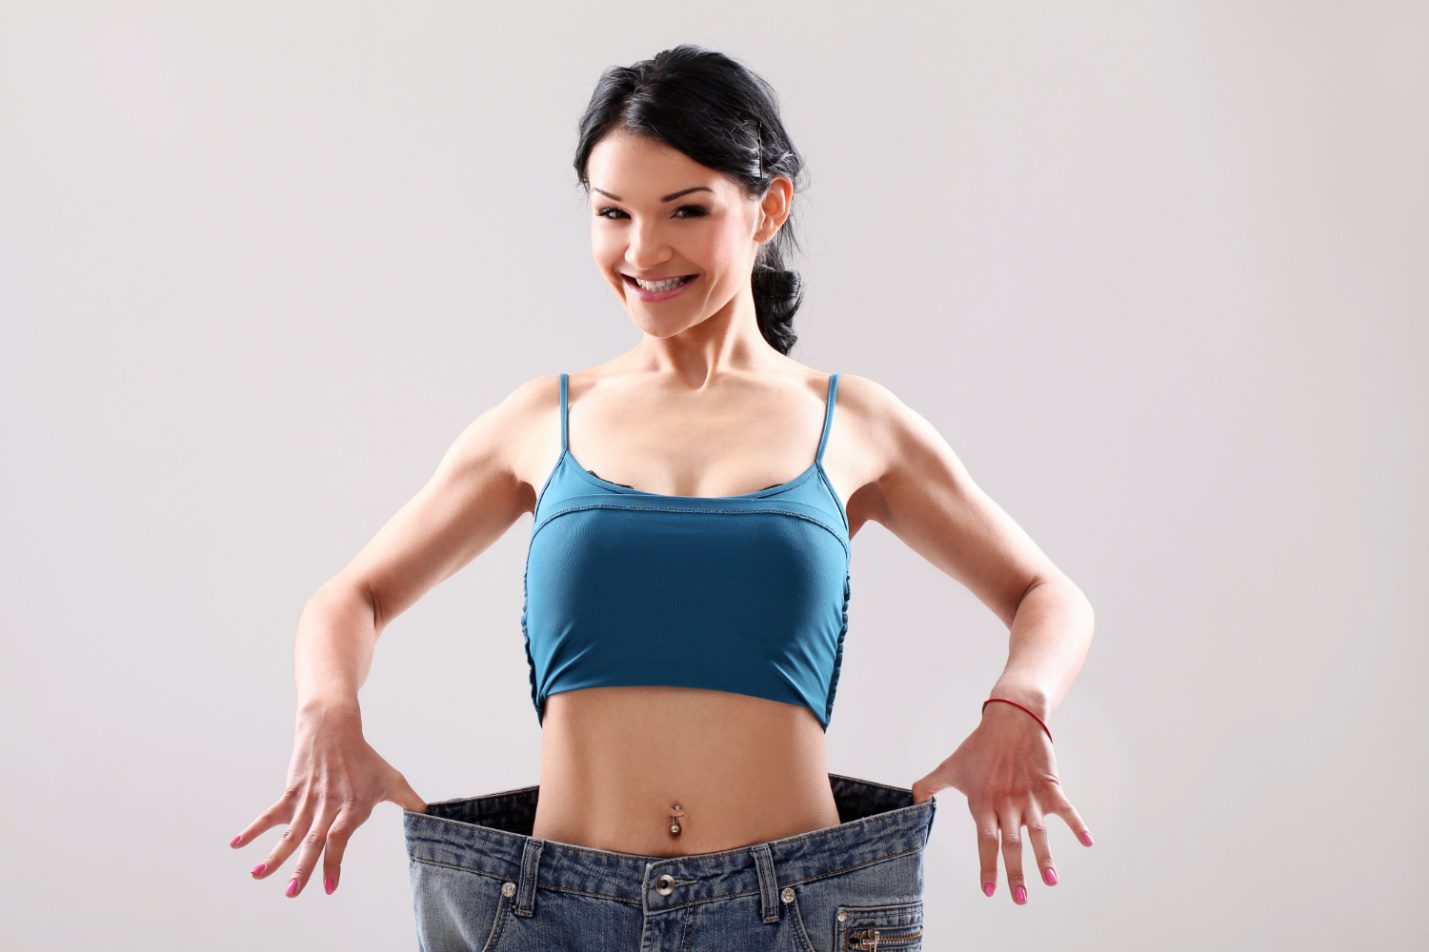 C:\Users\Talha\Downloads\portrait-woman-showing-her-weight-loss.jpg